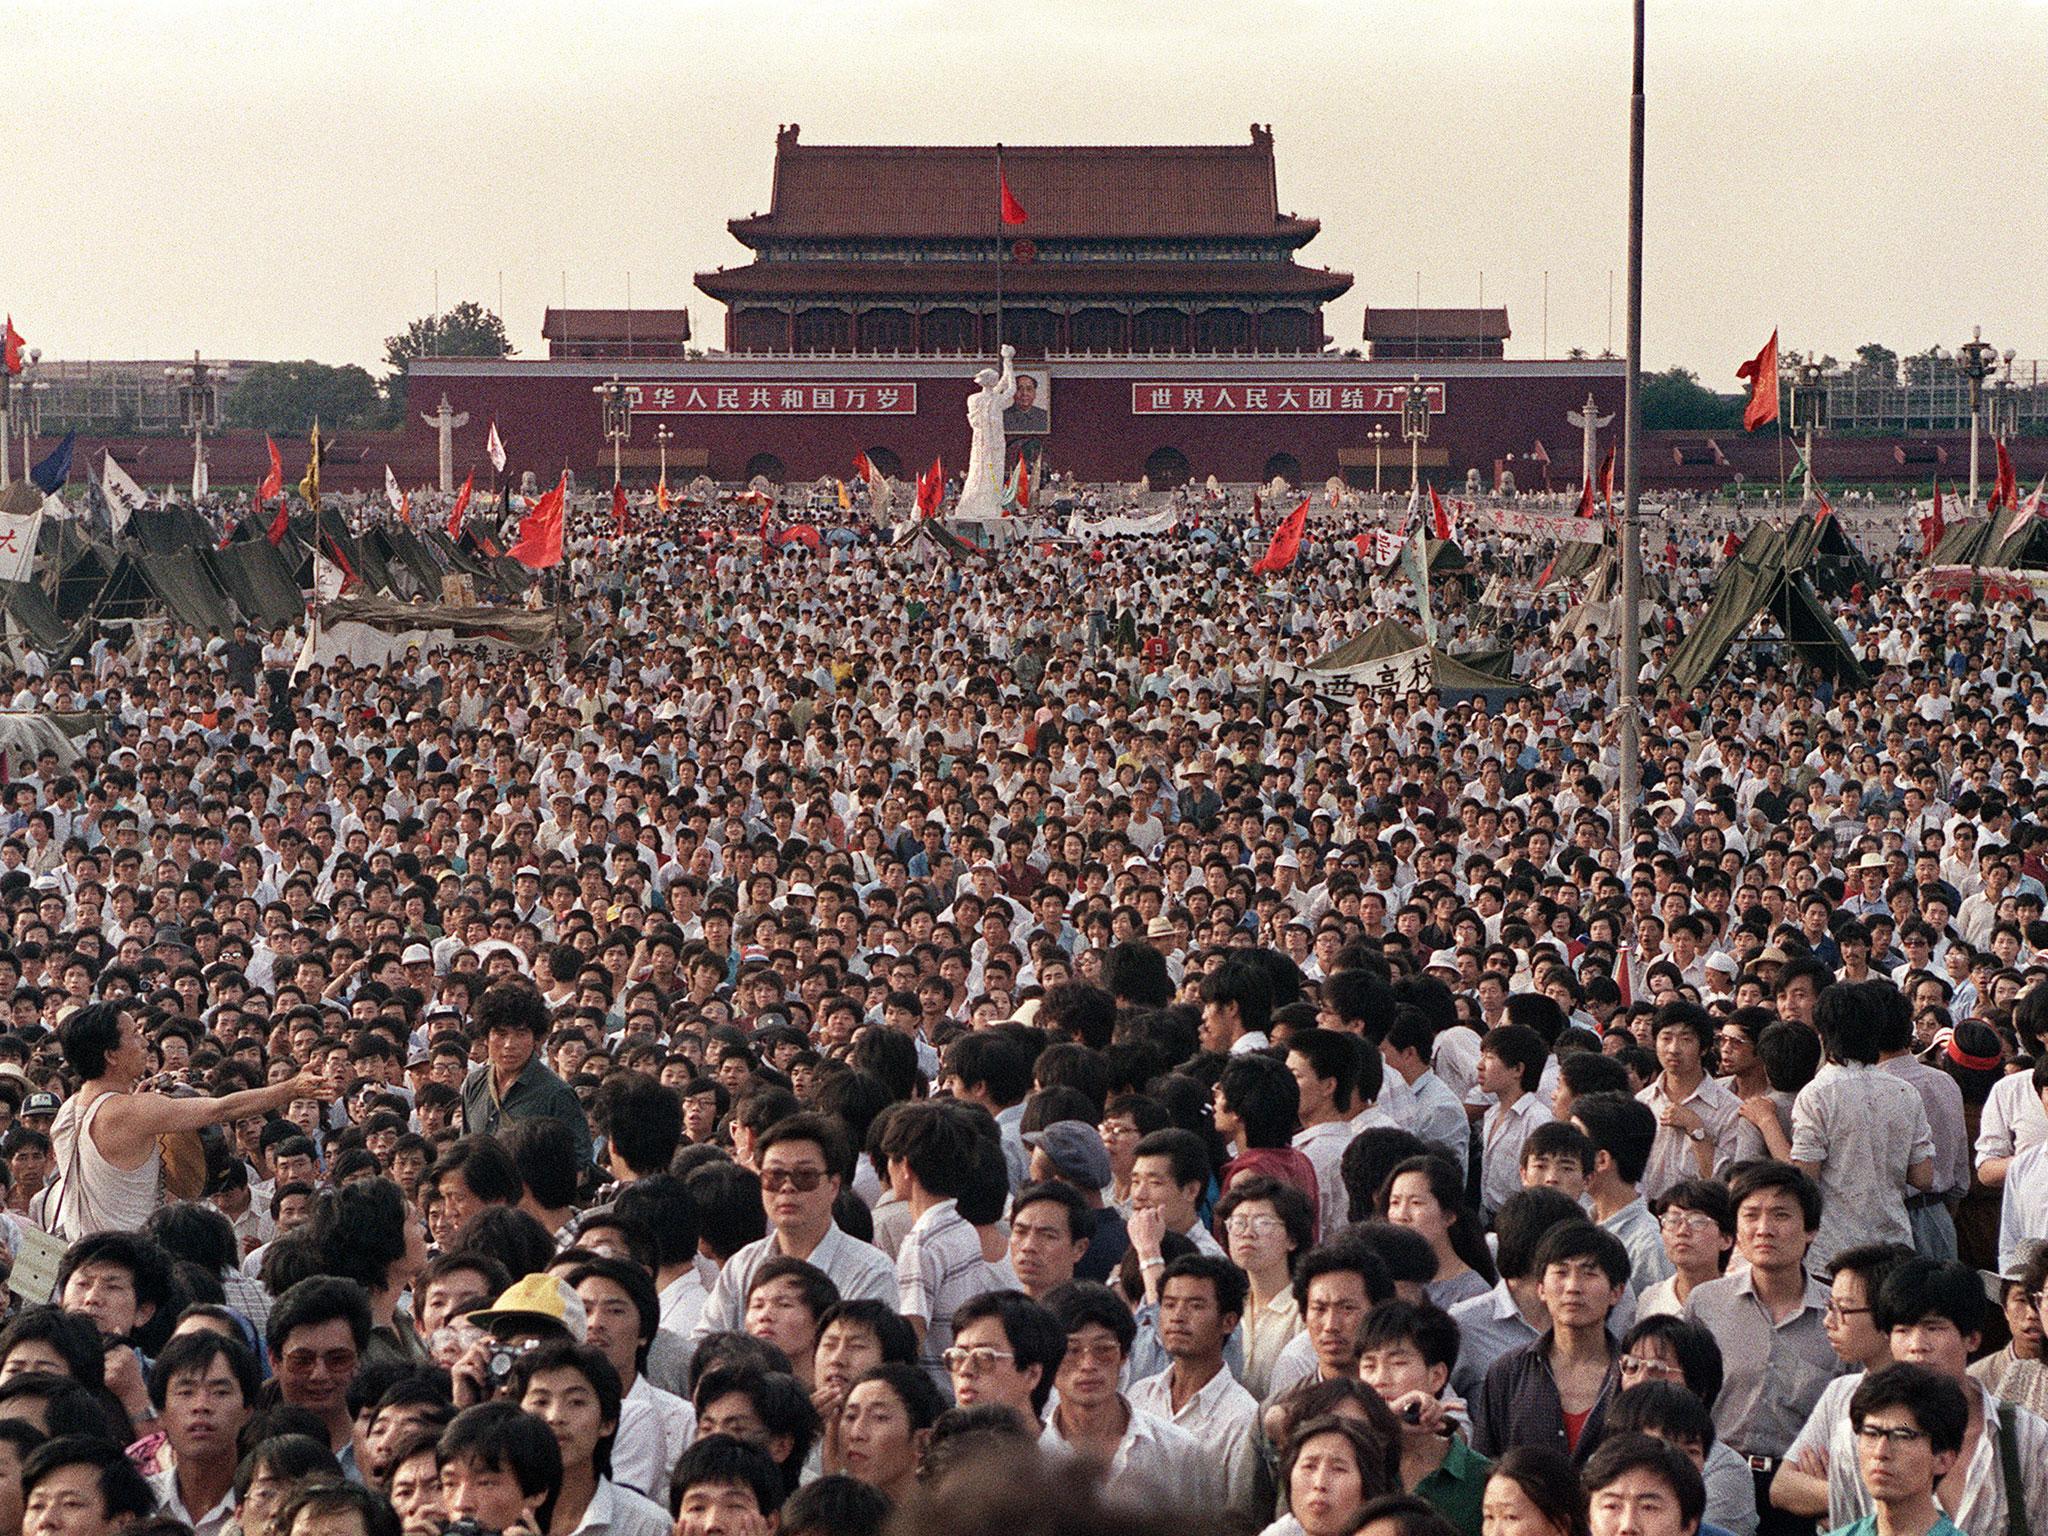 Hundreds of thousands of Chinese gathered in Tiananmen Square to demand democracy despite martial law in Beijing